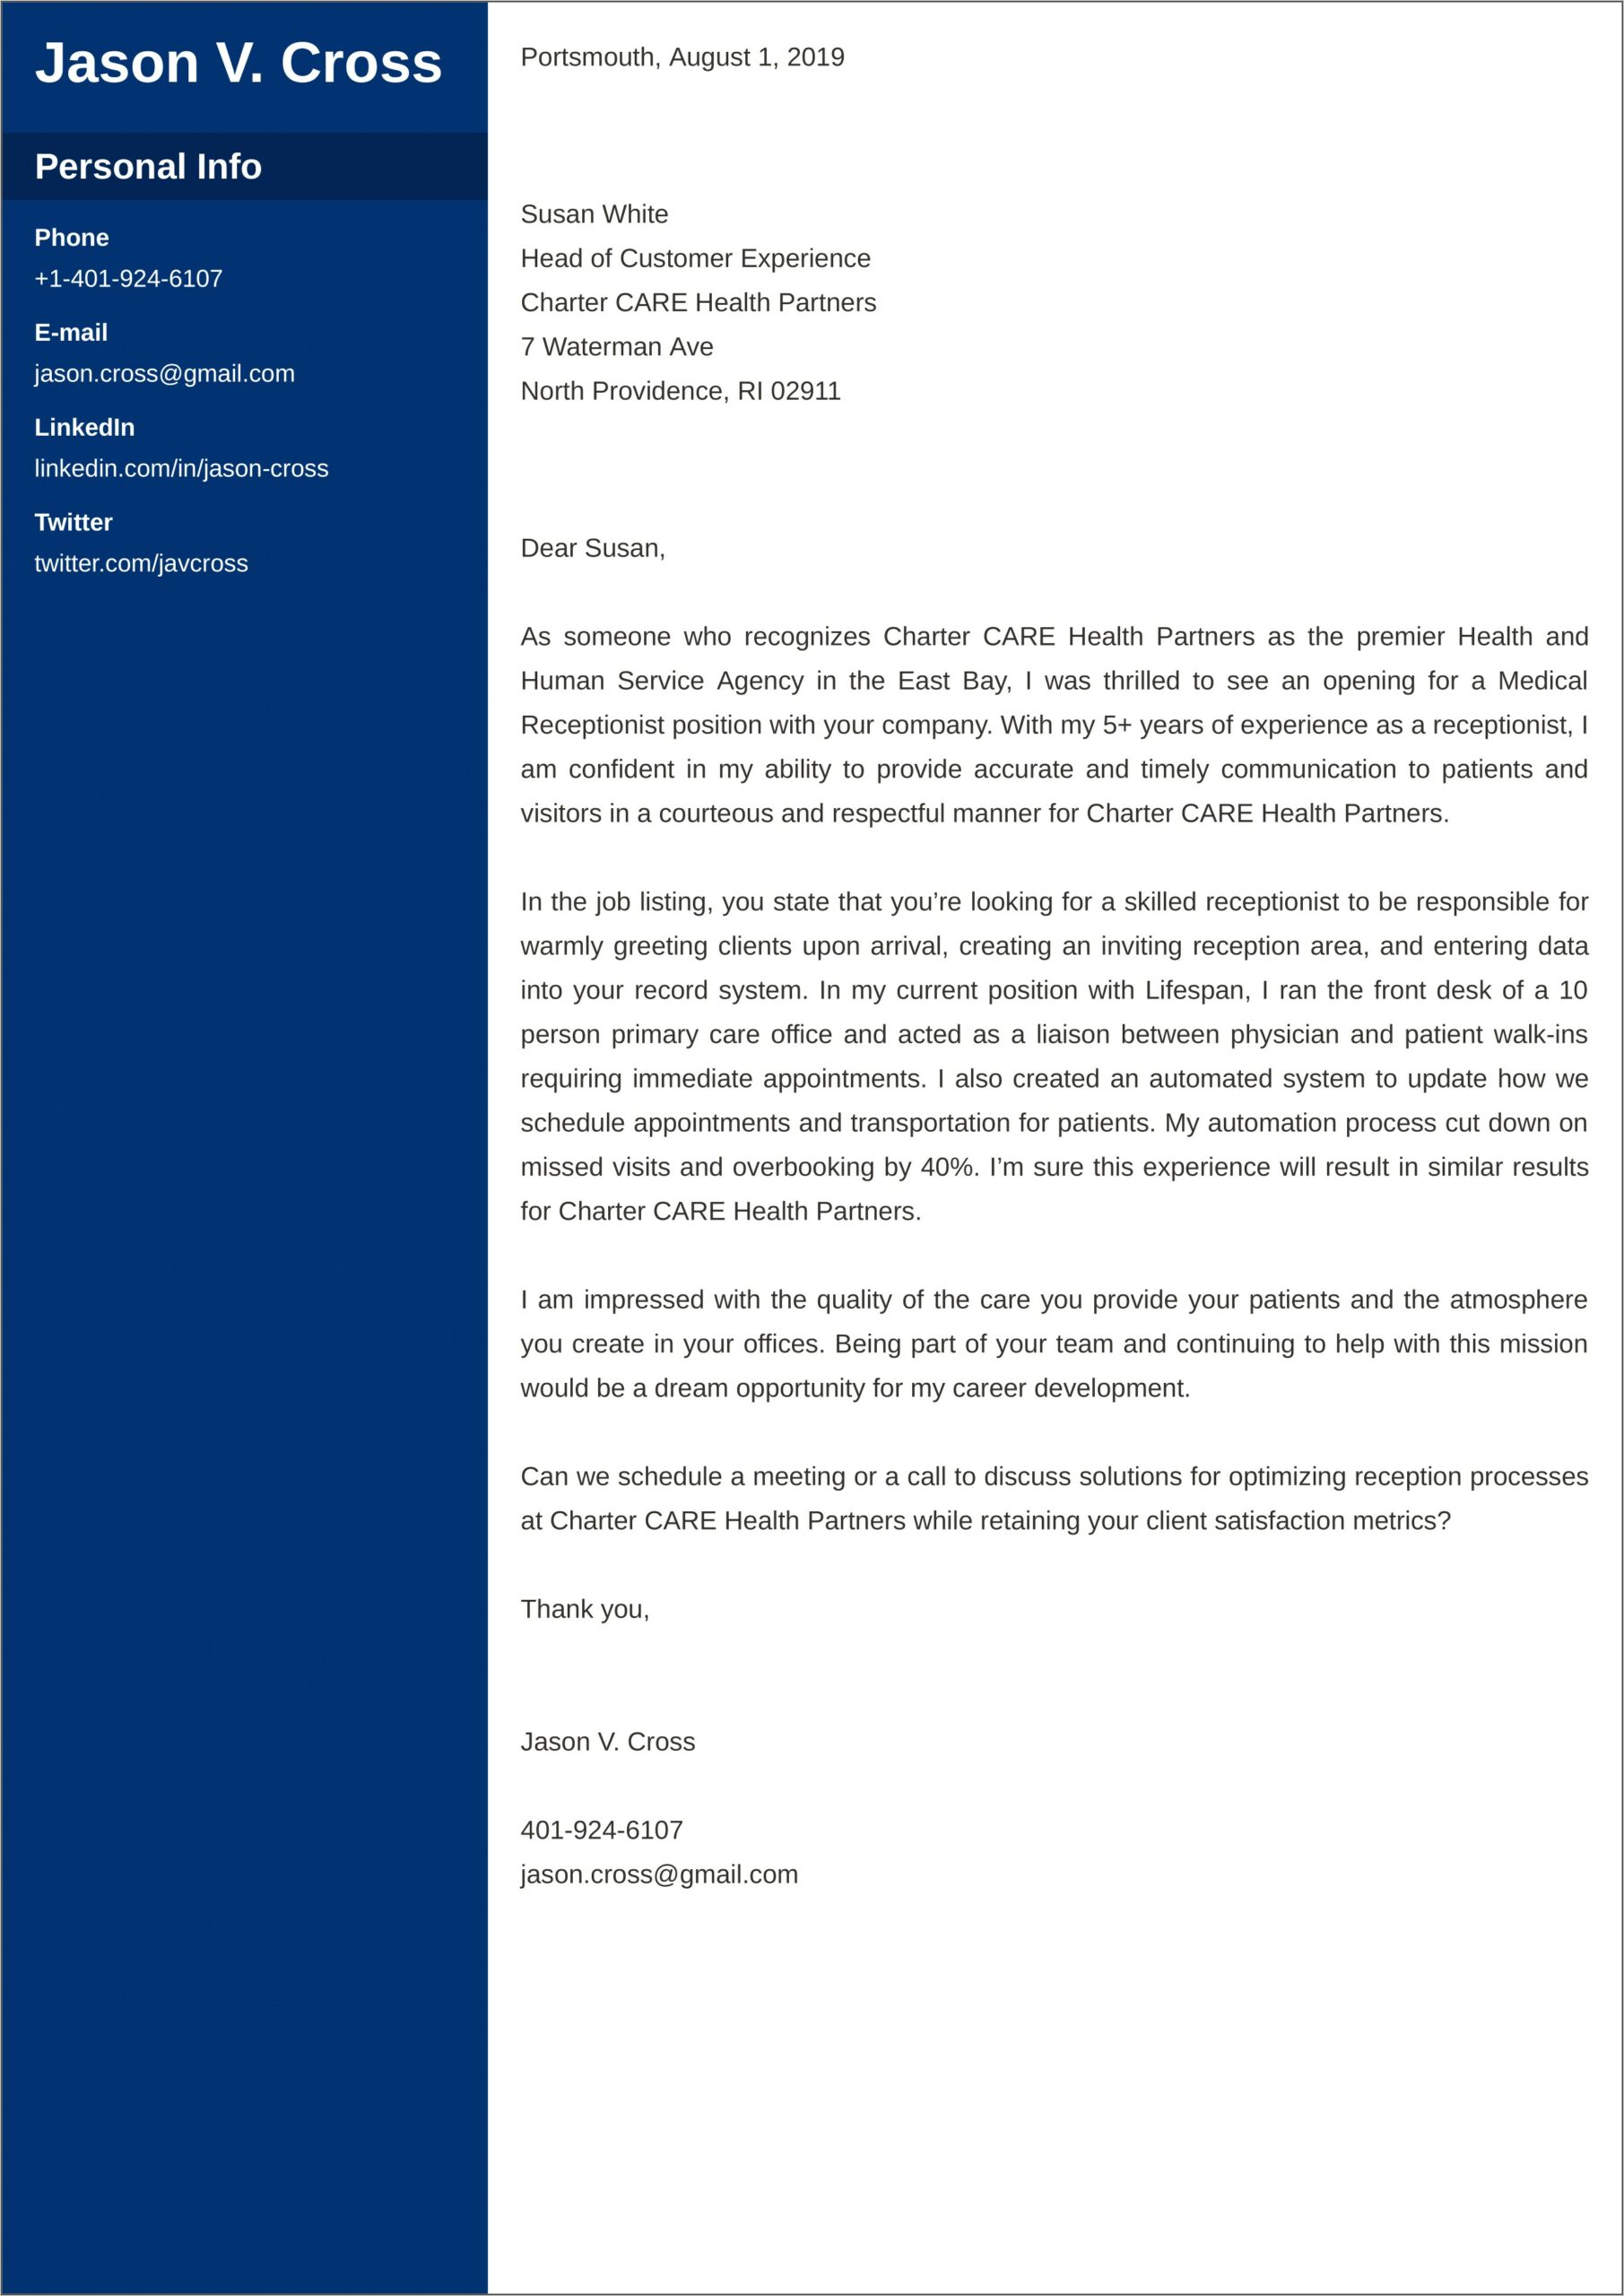 Email Cover Letter And Resume Sample